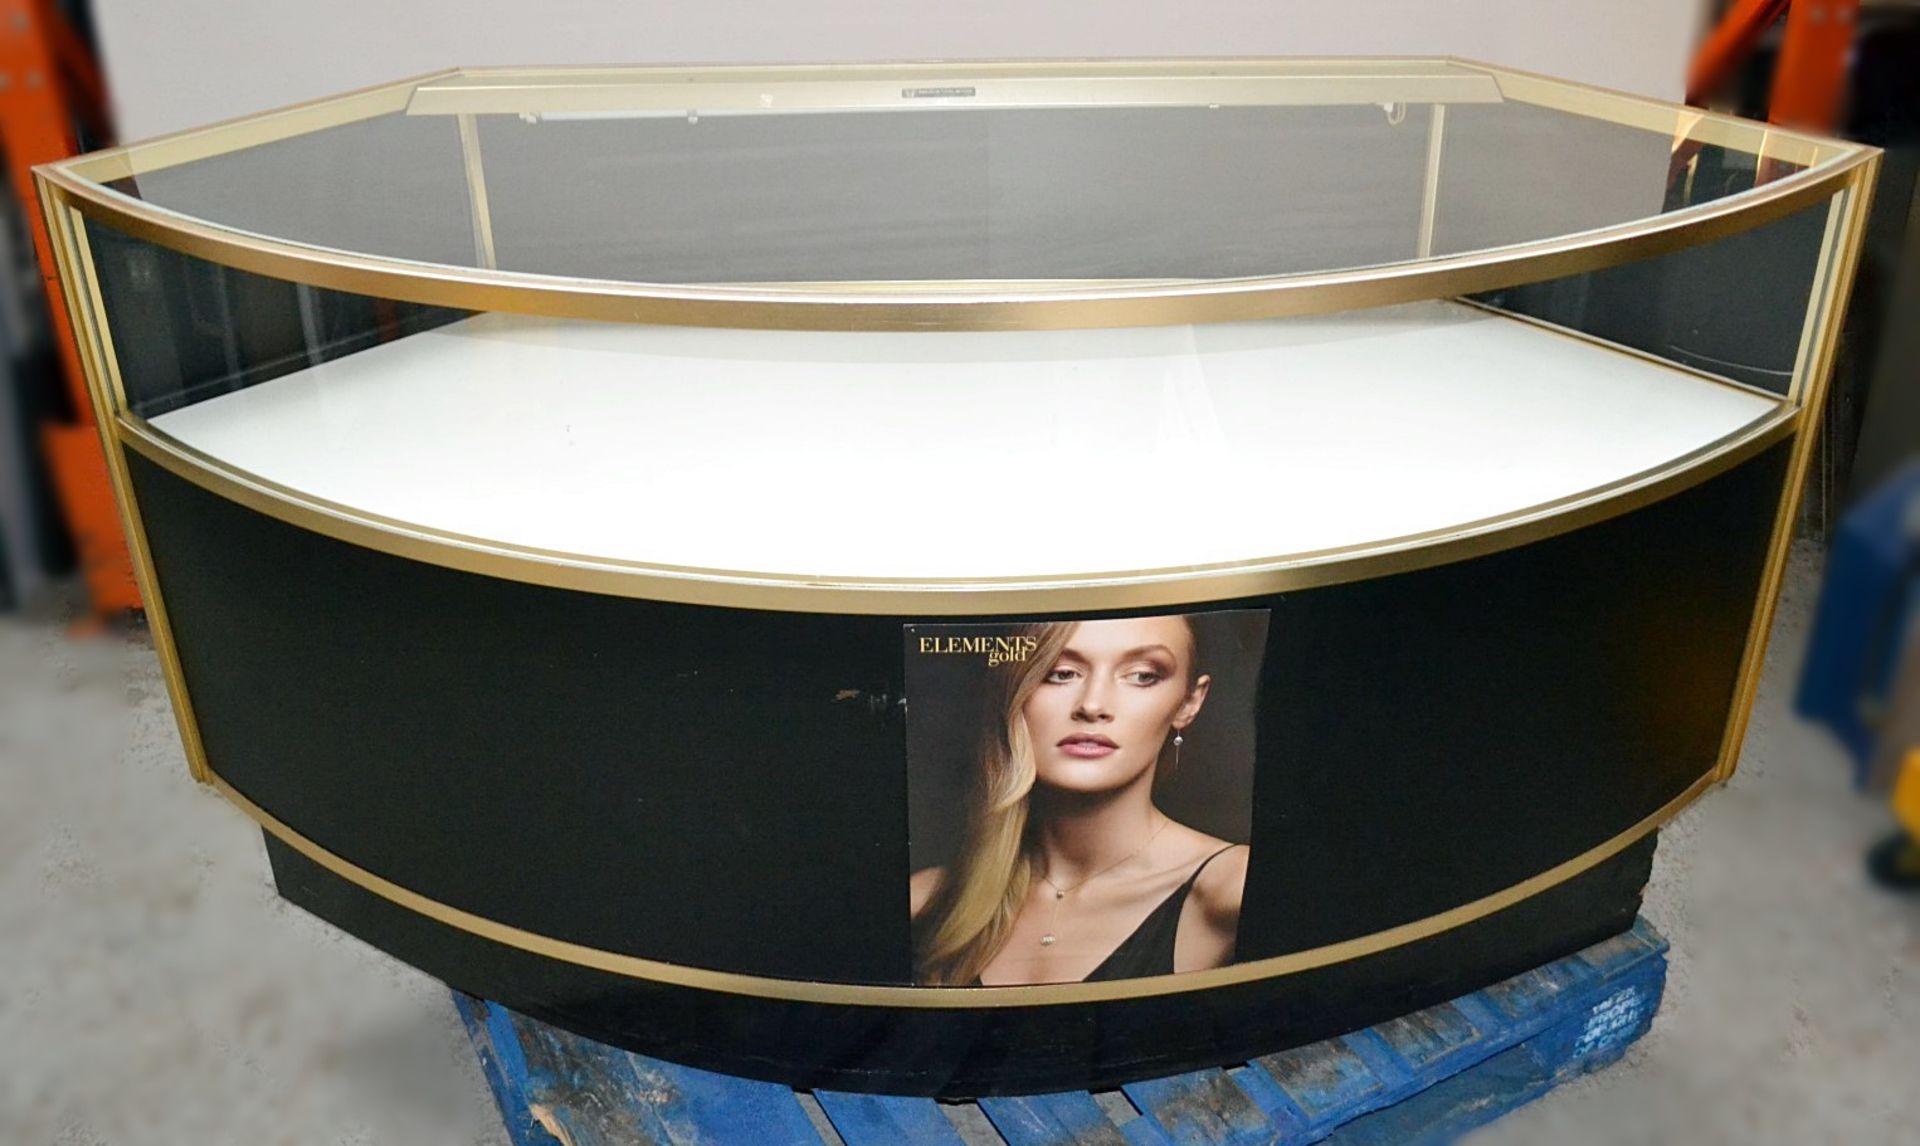 1 x Curved Retail Display Counter In Gold and Black, With Illuminated Glass Display